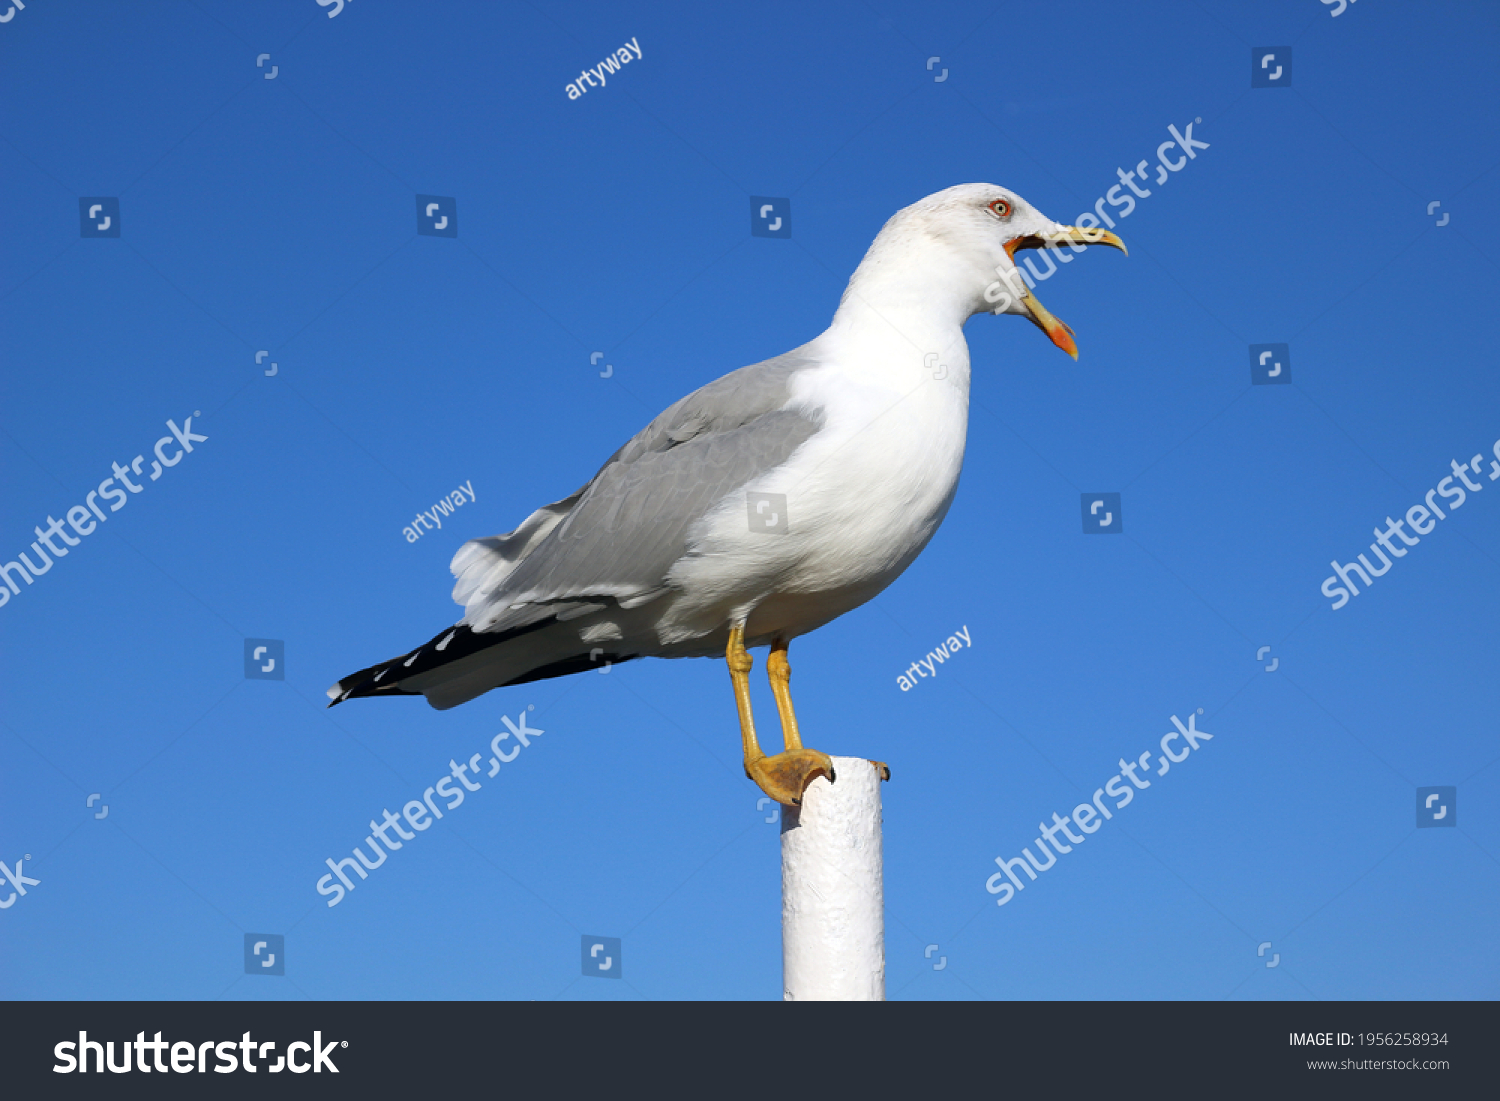 Large seagull with an open beak against blue sky, beautiful seabird stands on pole and shouts #1956258934